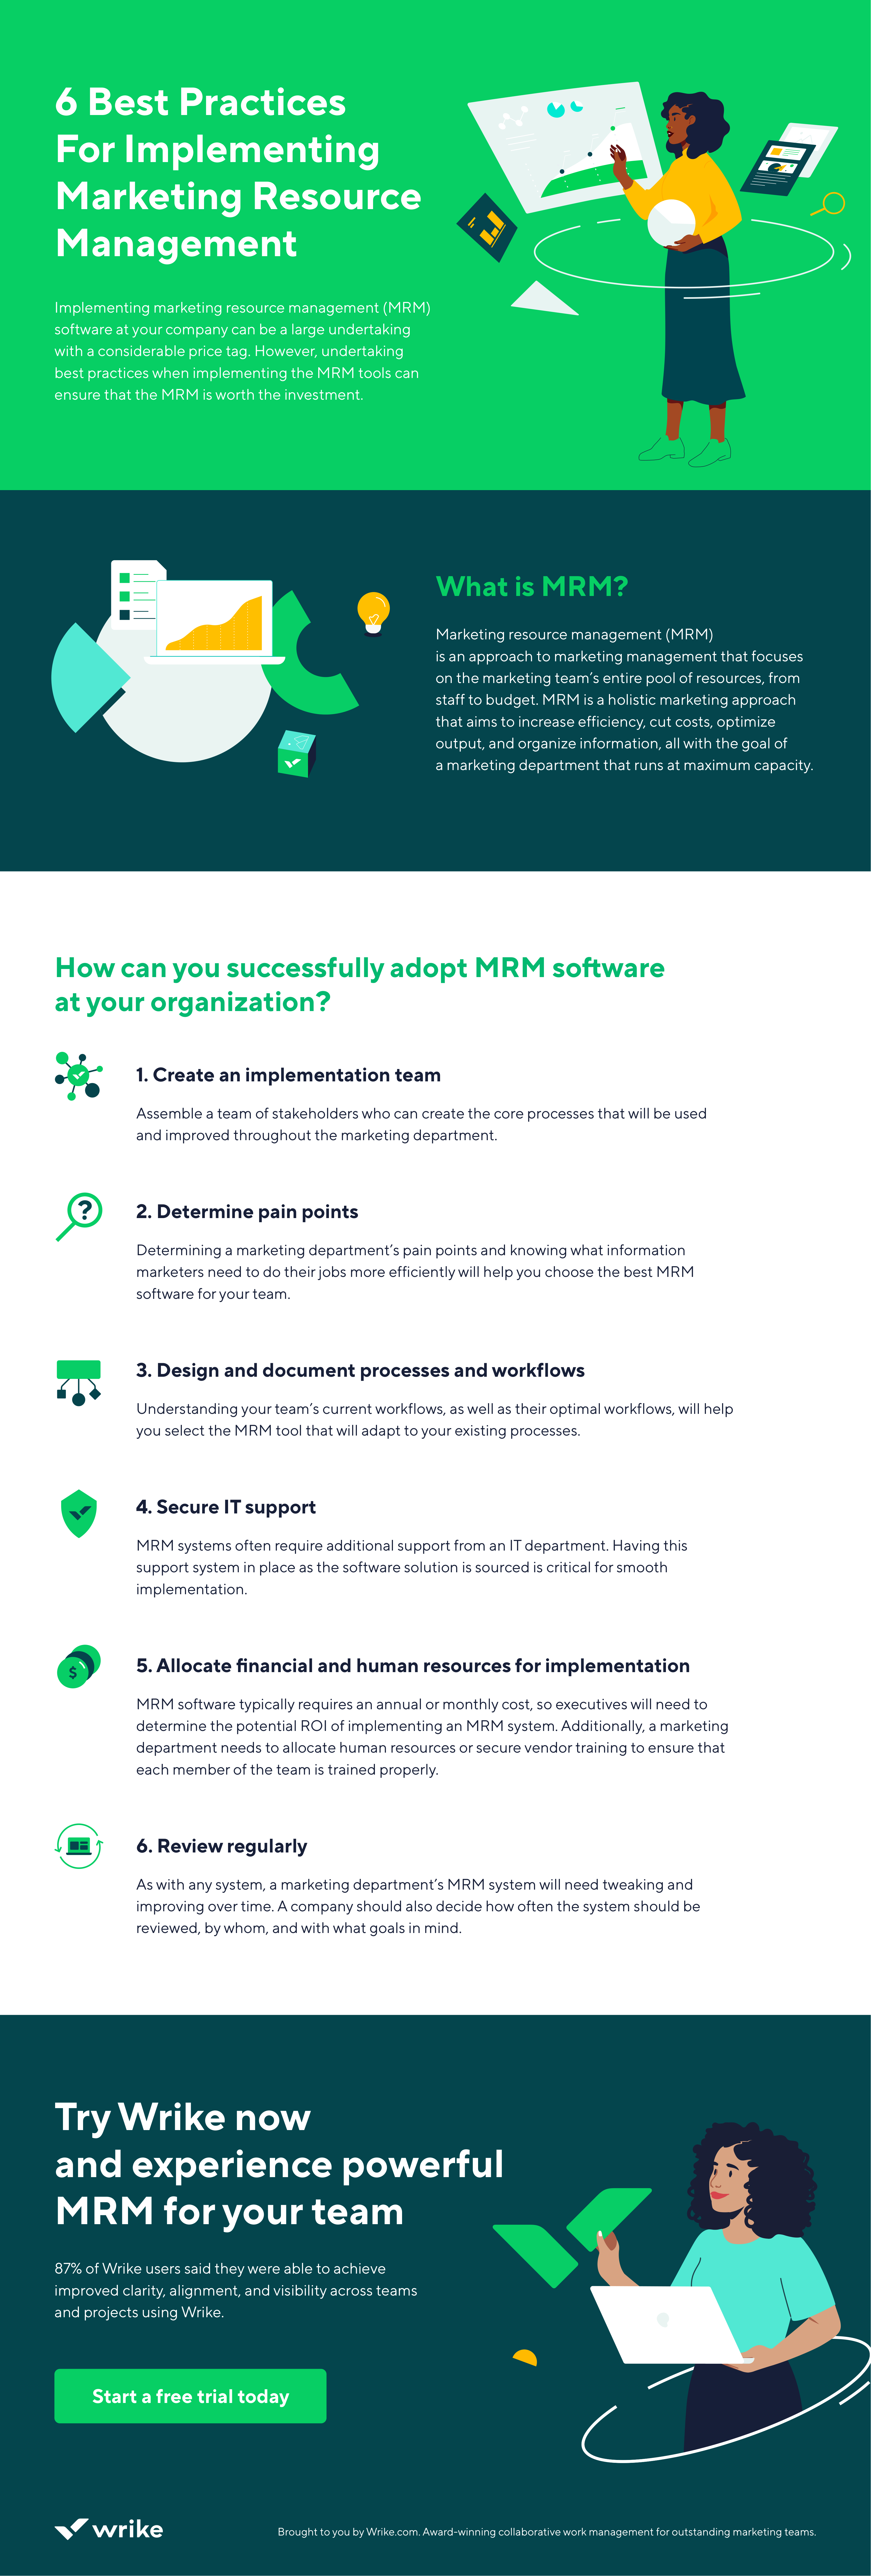 Infographic showing the 6 Best Practices for Implementing Marketing Resource Management